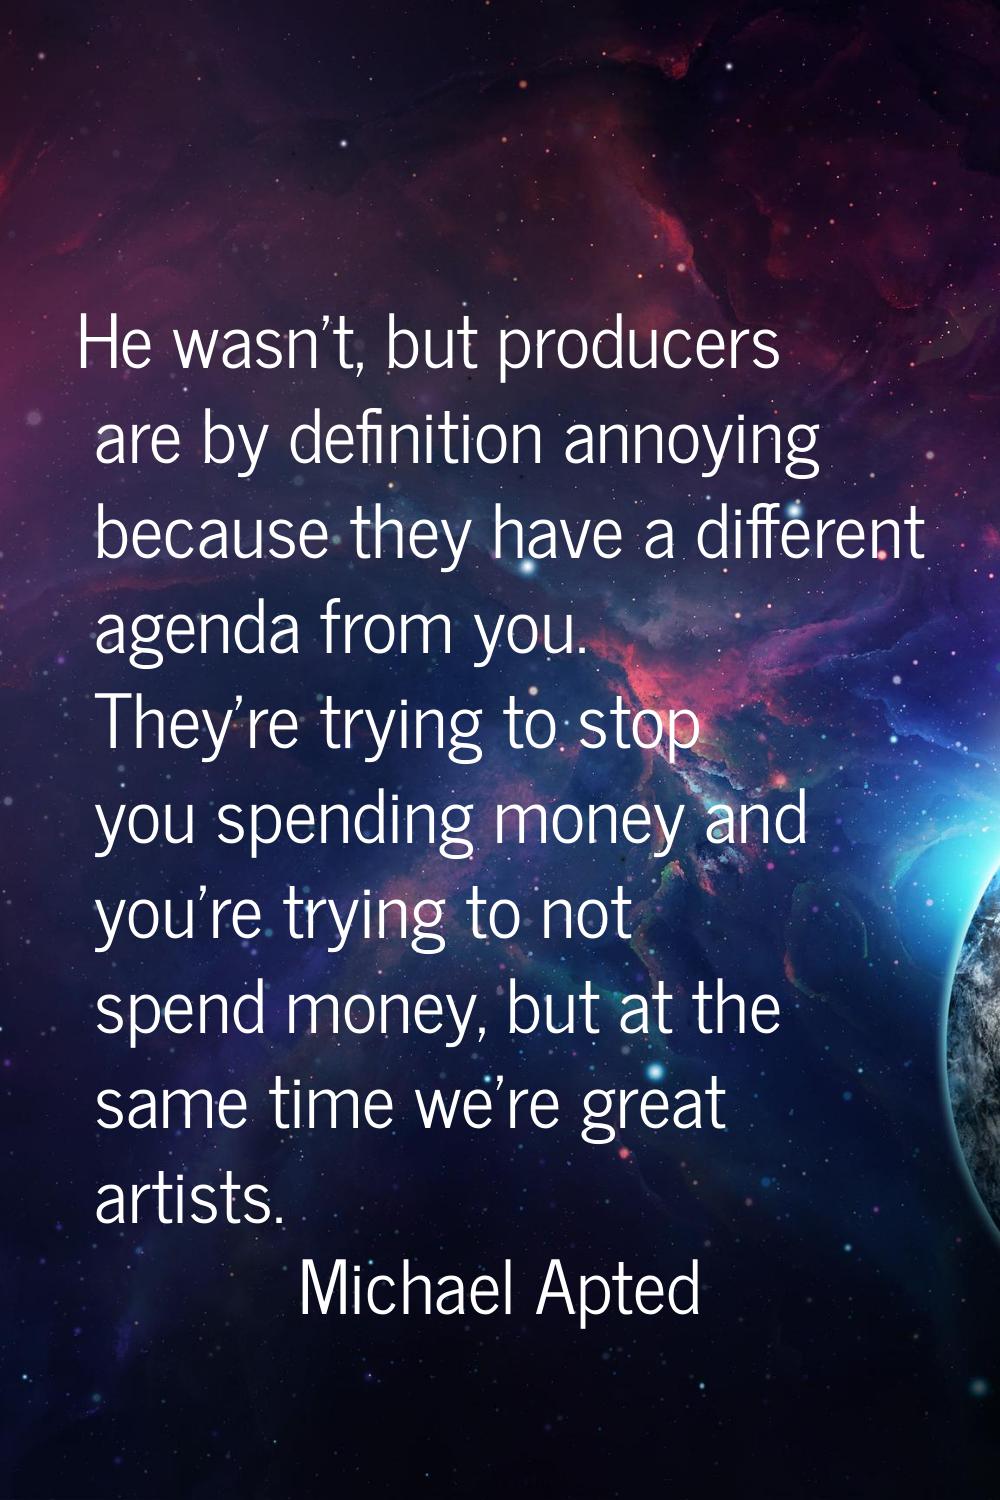 He wasn't, but producers are by definition annoying because they have a different agenda from you. 